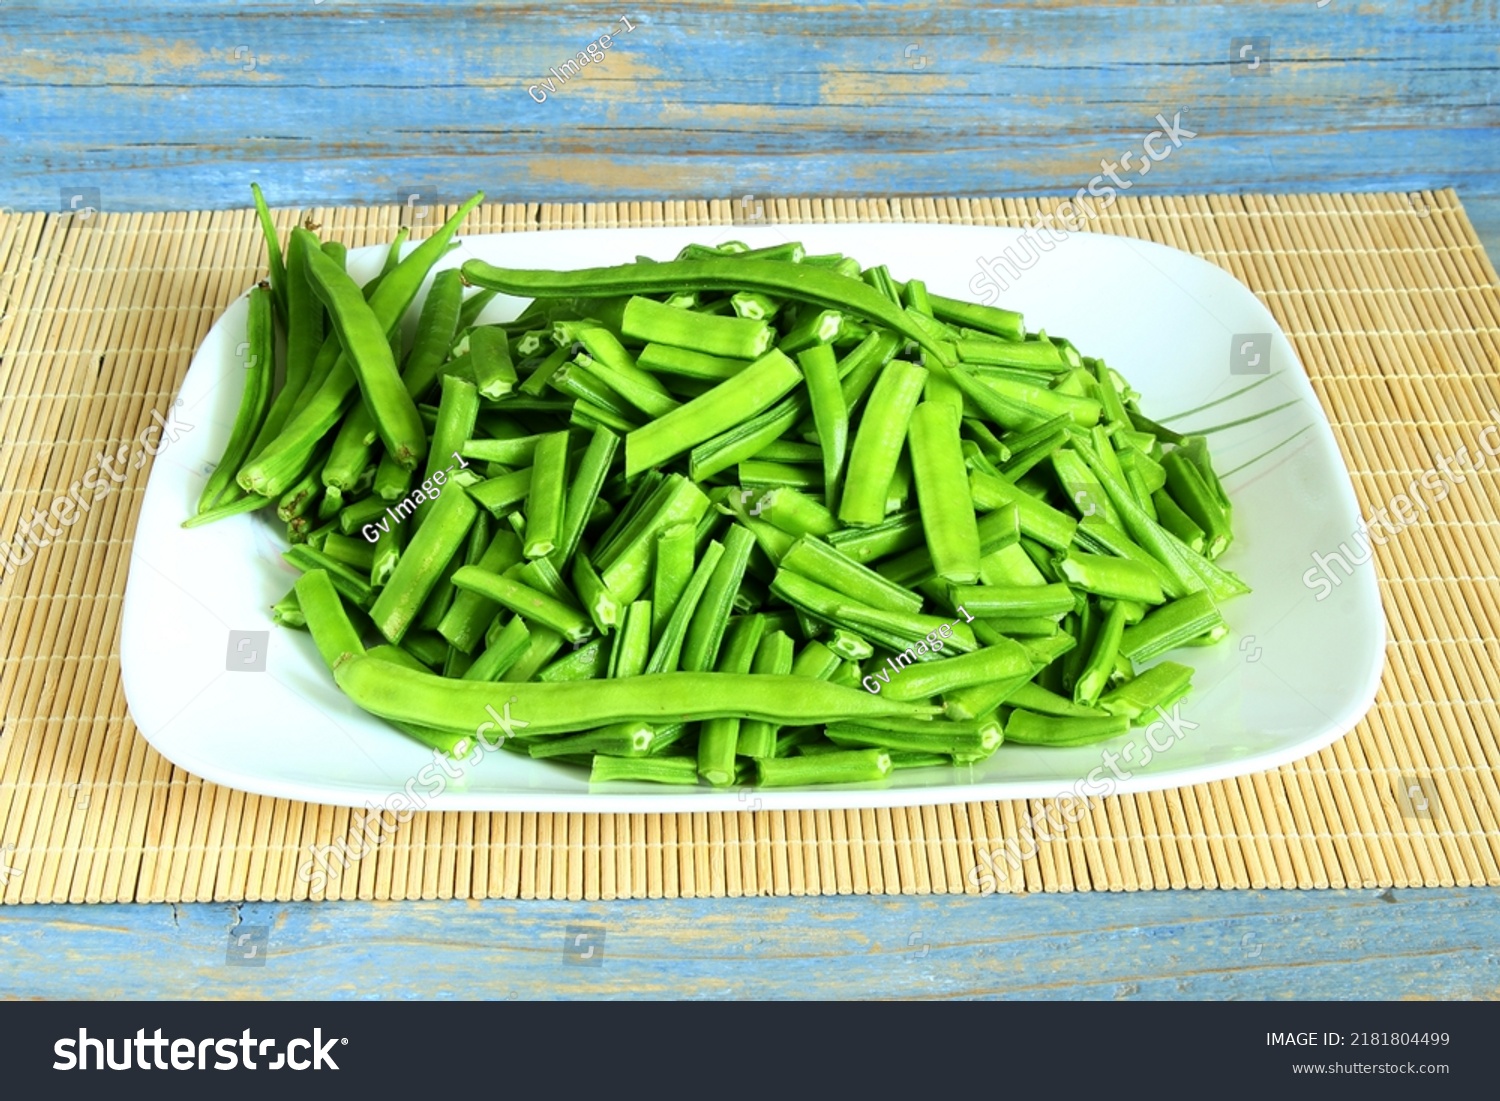 fresh chopped or cut indian vegetable green cluster beans or guar beans in dish ready for cooking #2181804499